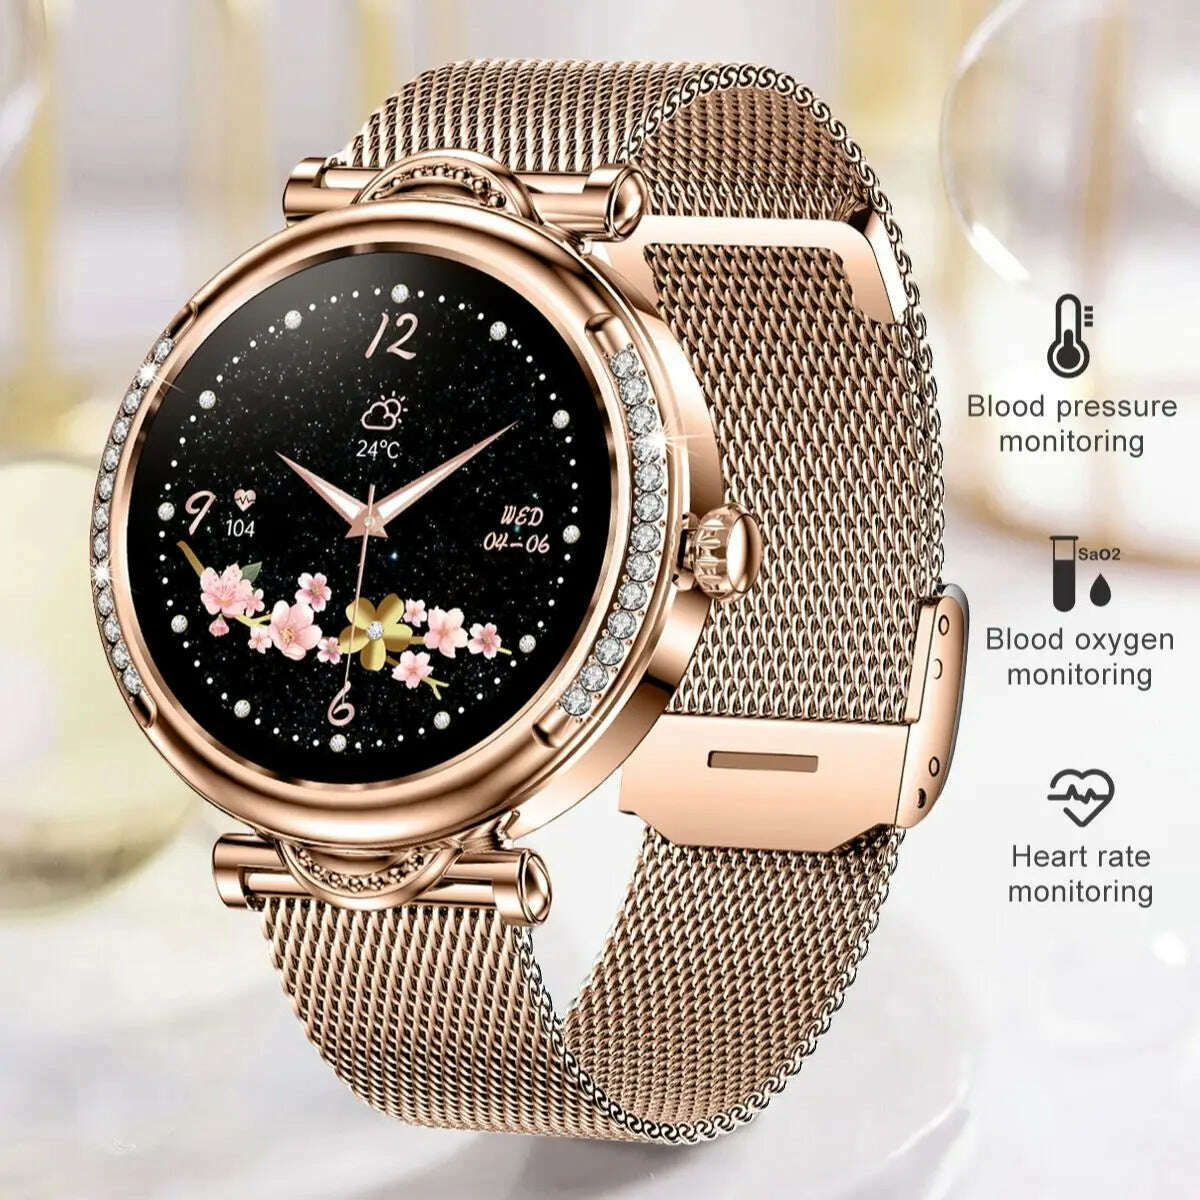 KIMLUD, New Fitness Smart Watch Women Bluetooth Call Shinning Diamond Watch Heart Rate Monitoring Voice Assistant Sports Smartwatch, KIMLUD Womens Clothes